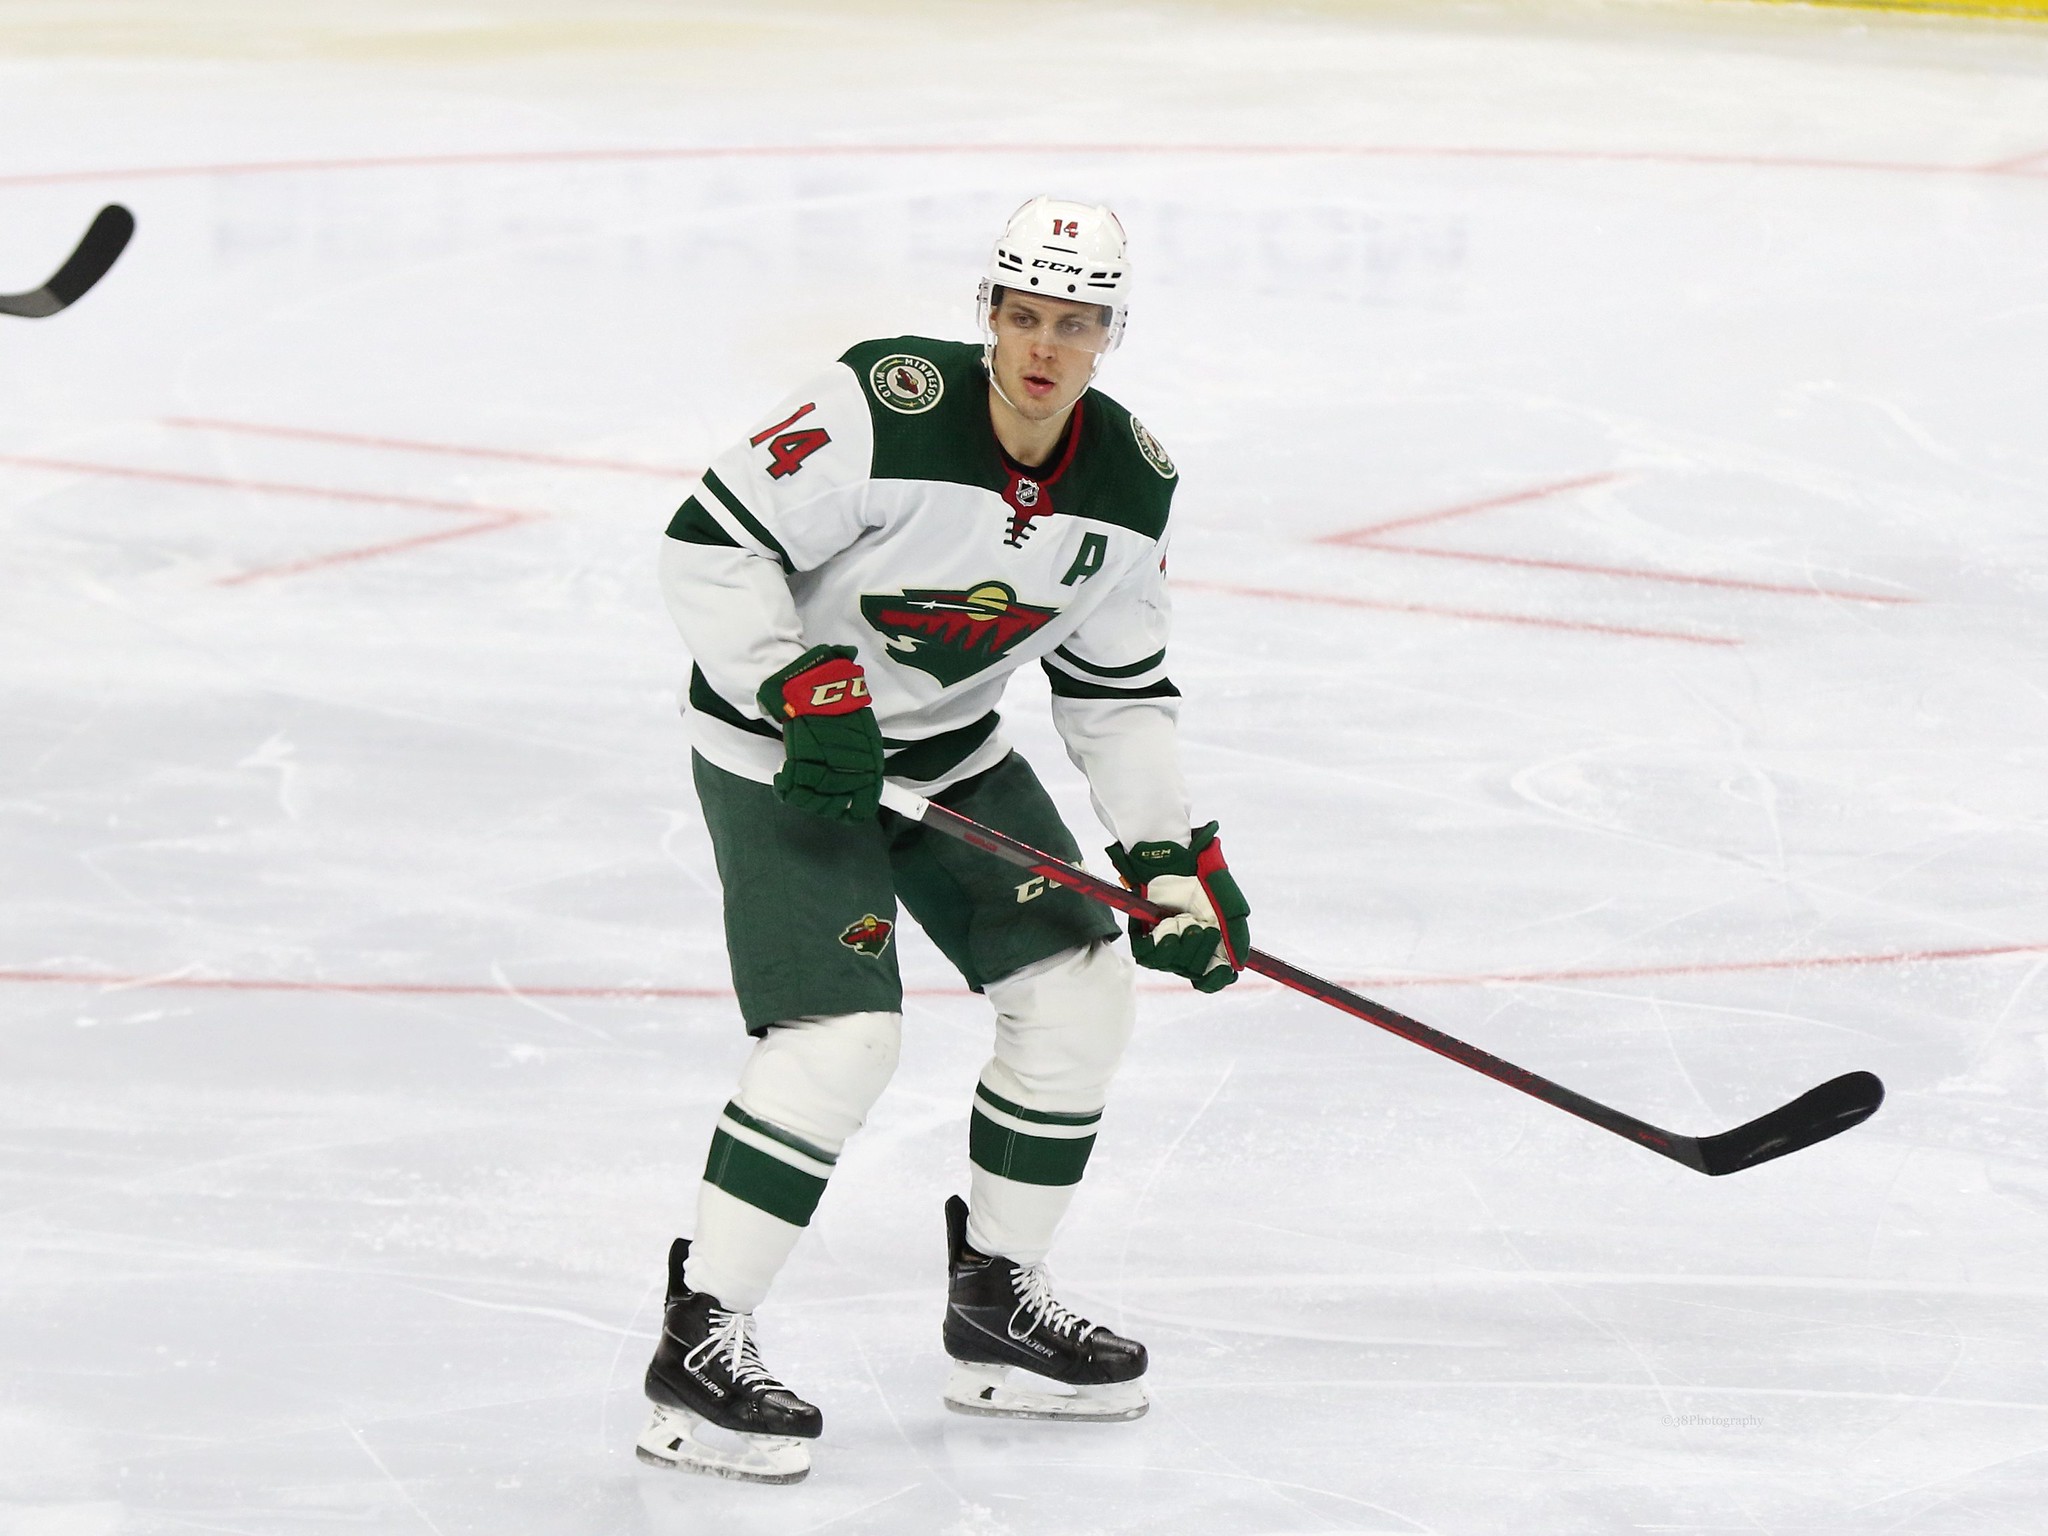 Minnesota Wild’s Offseason Game Plan: Faceoffs, Shots, and Consistency